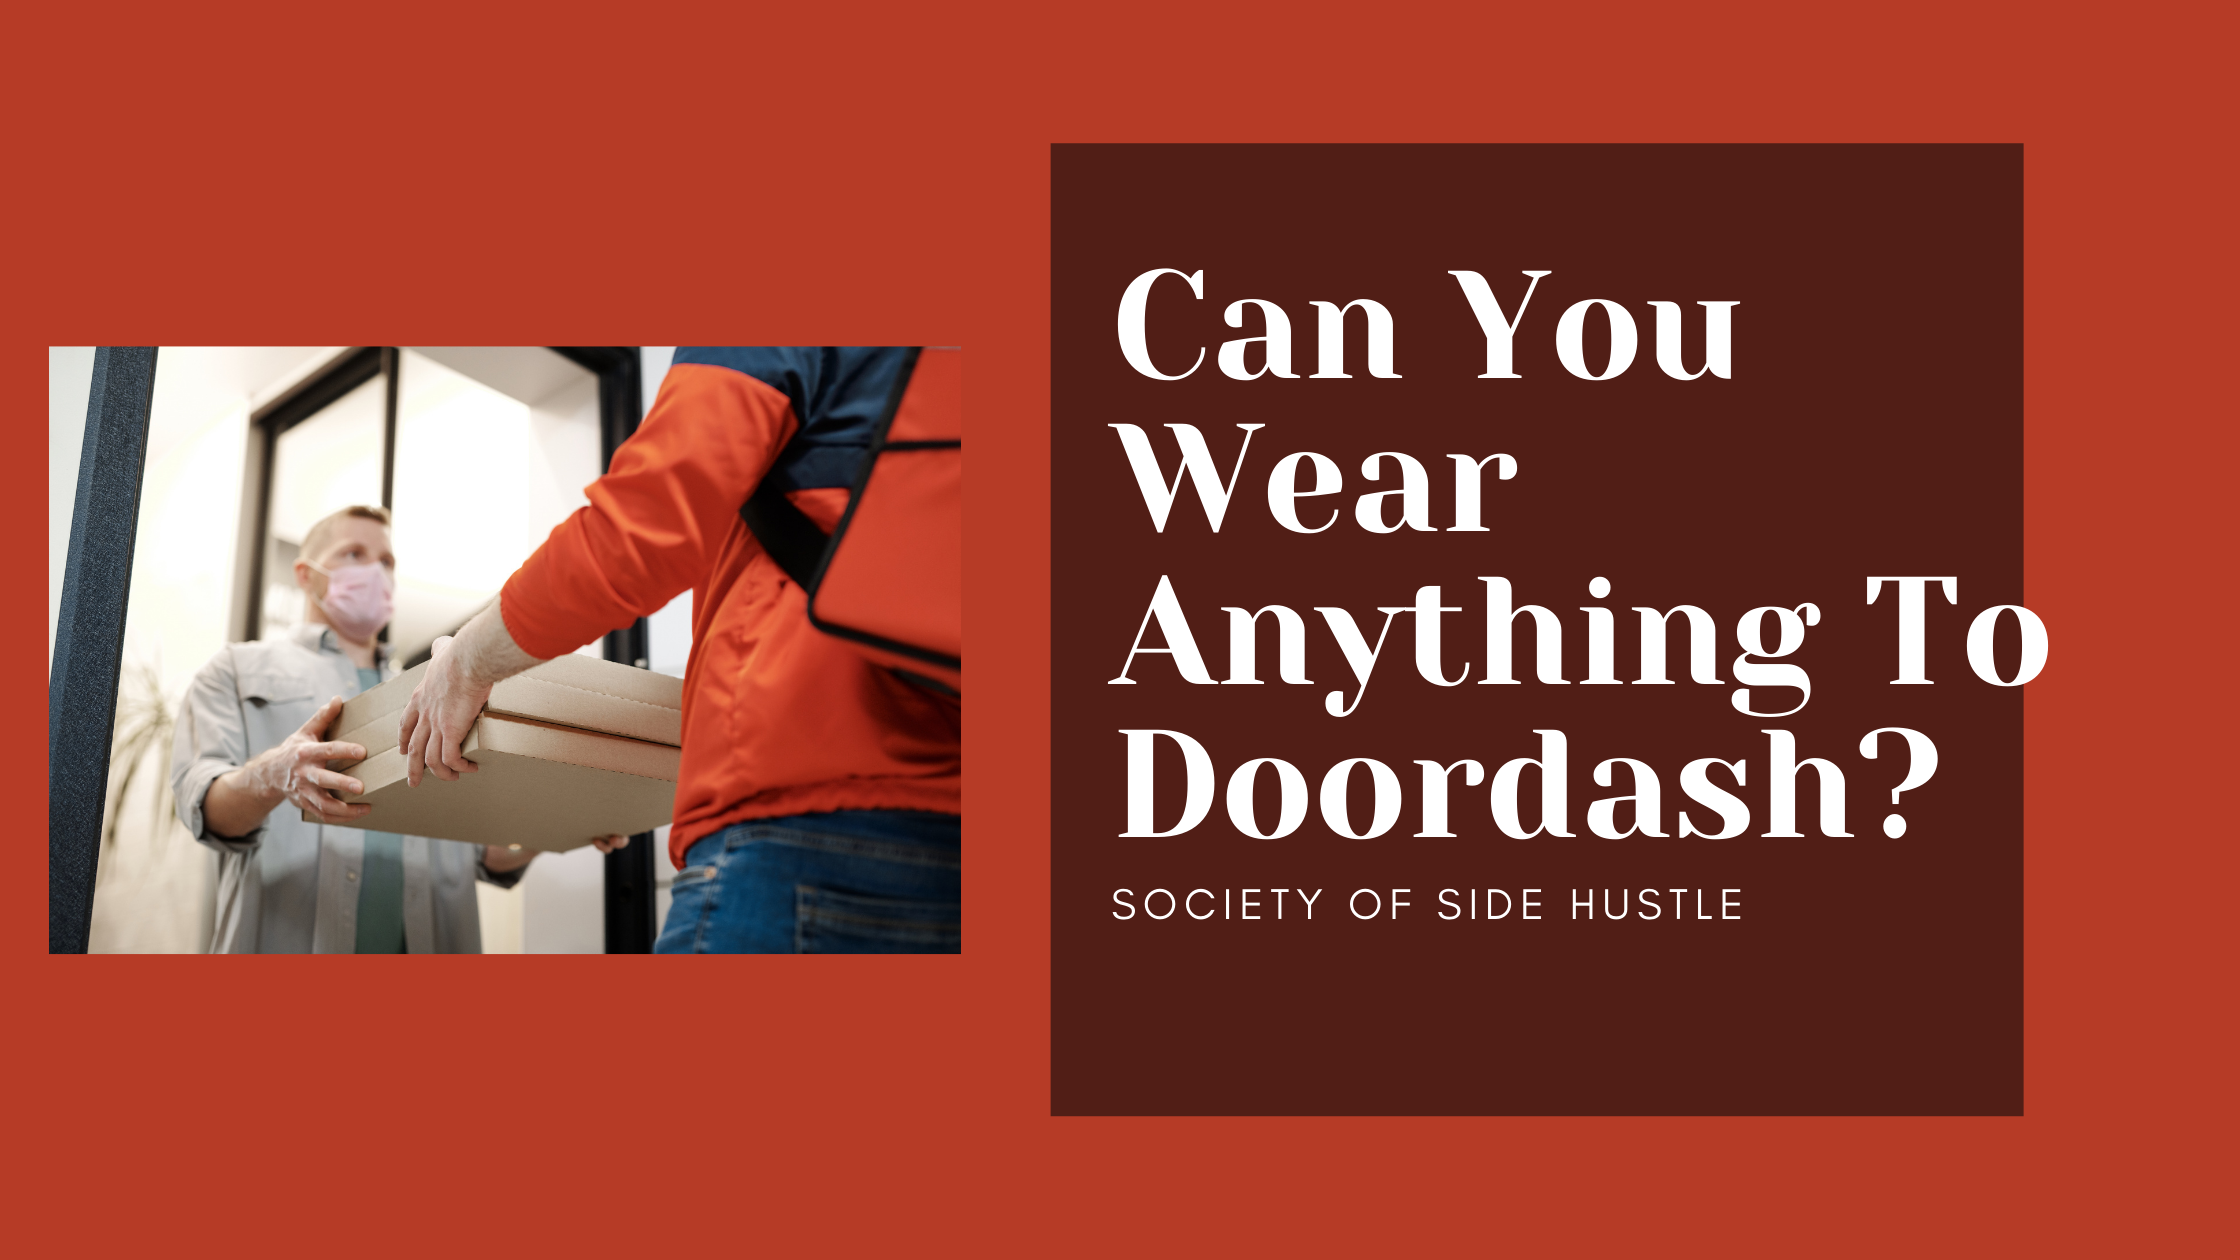 Is There a Doordash Dress Code?